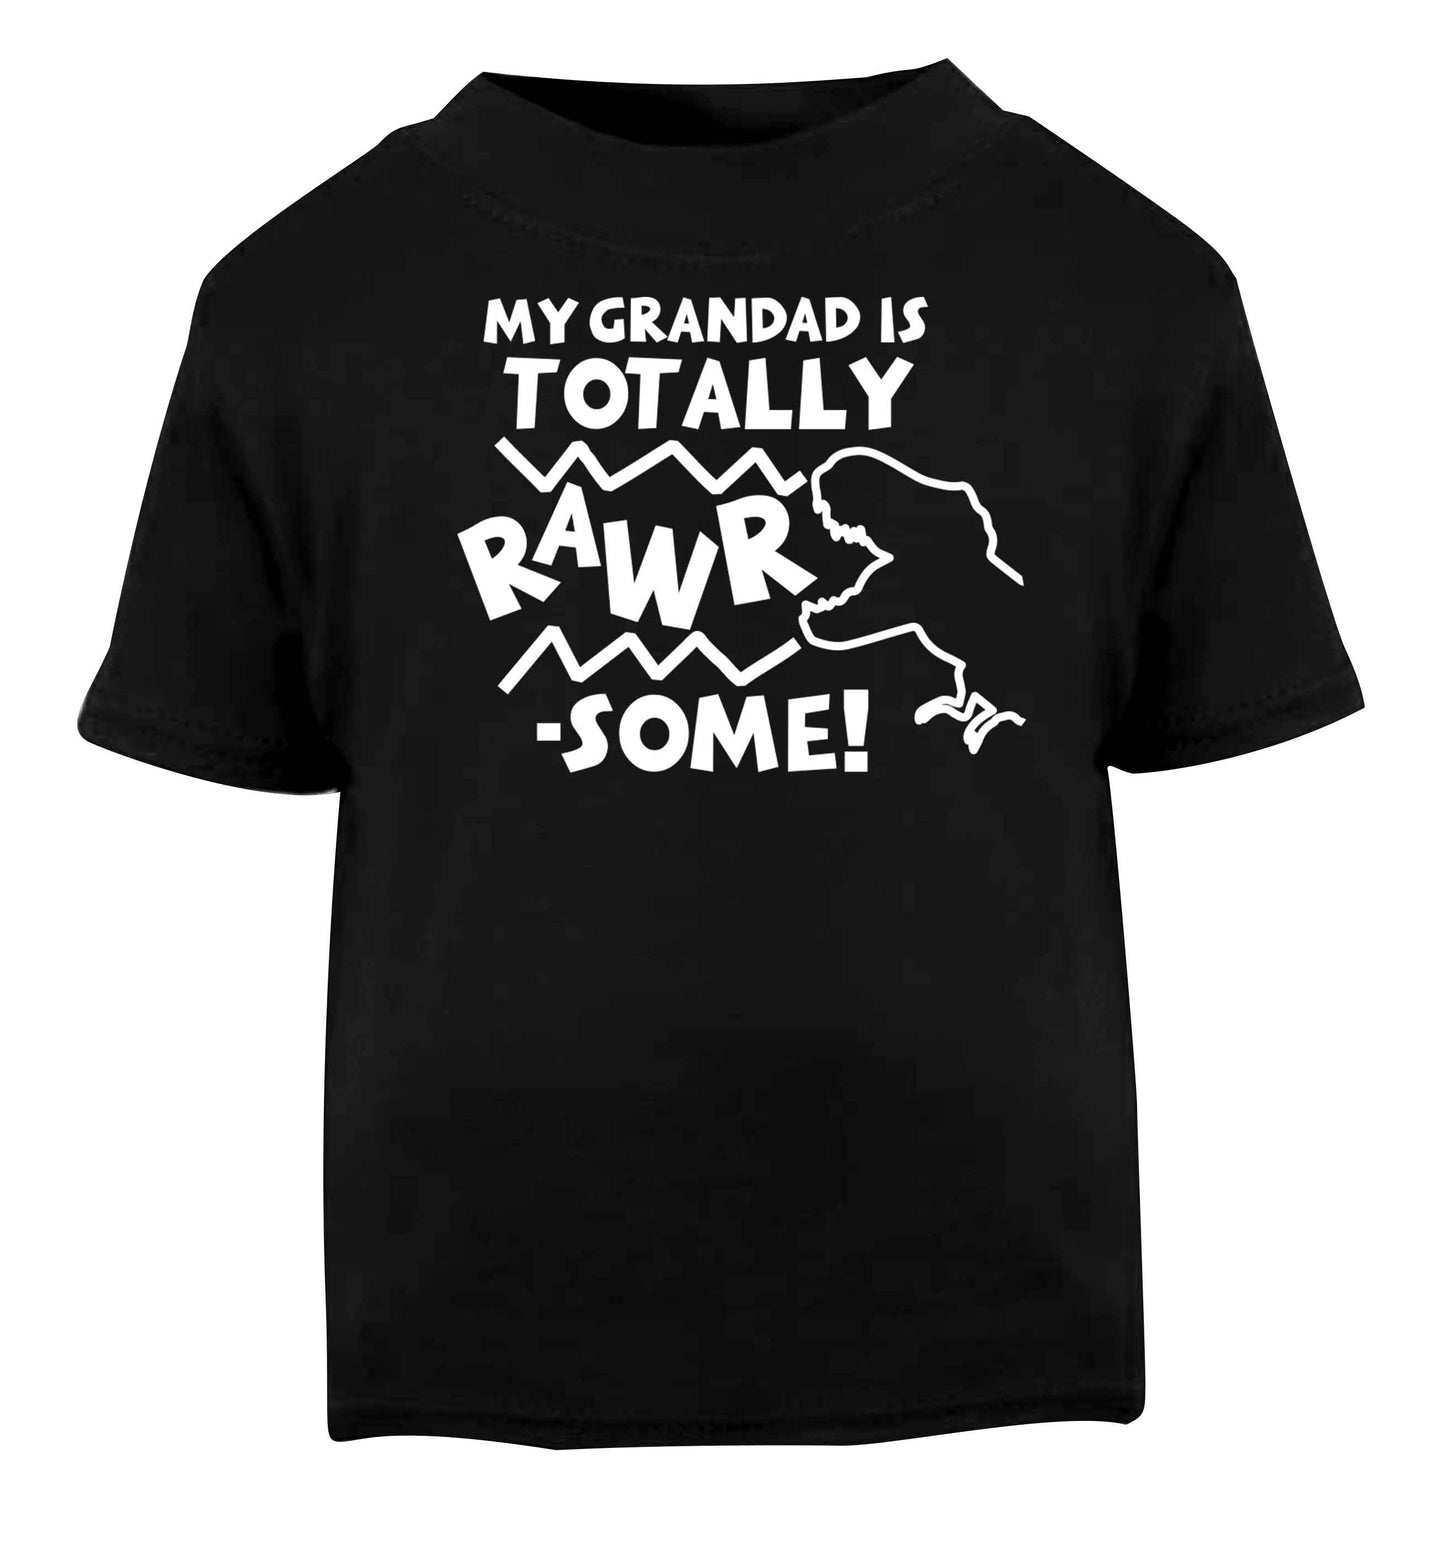 My grandad is totally rawrsome Black baby toddler Tshirt 2 years